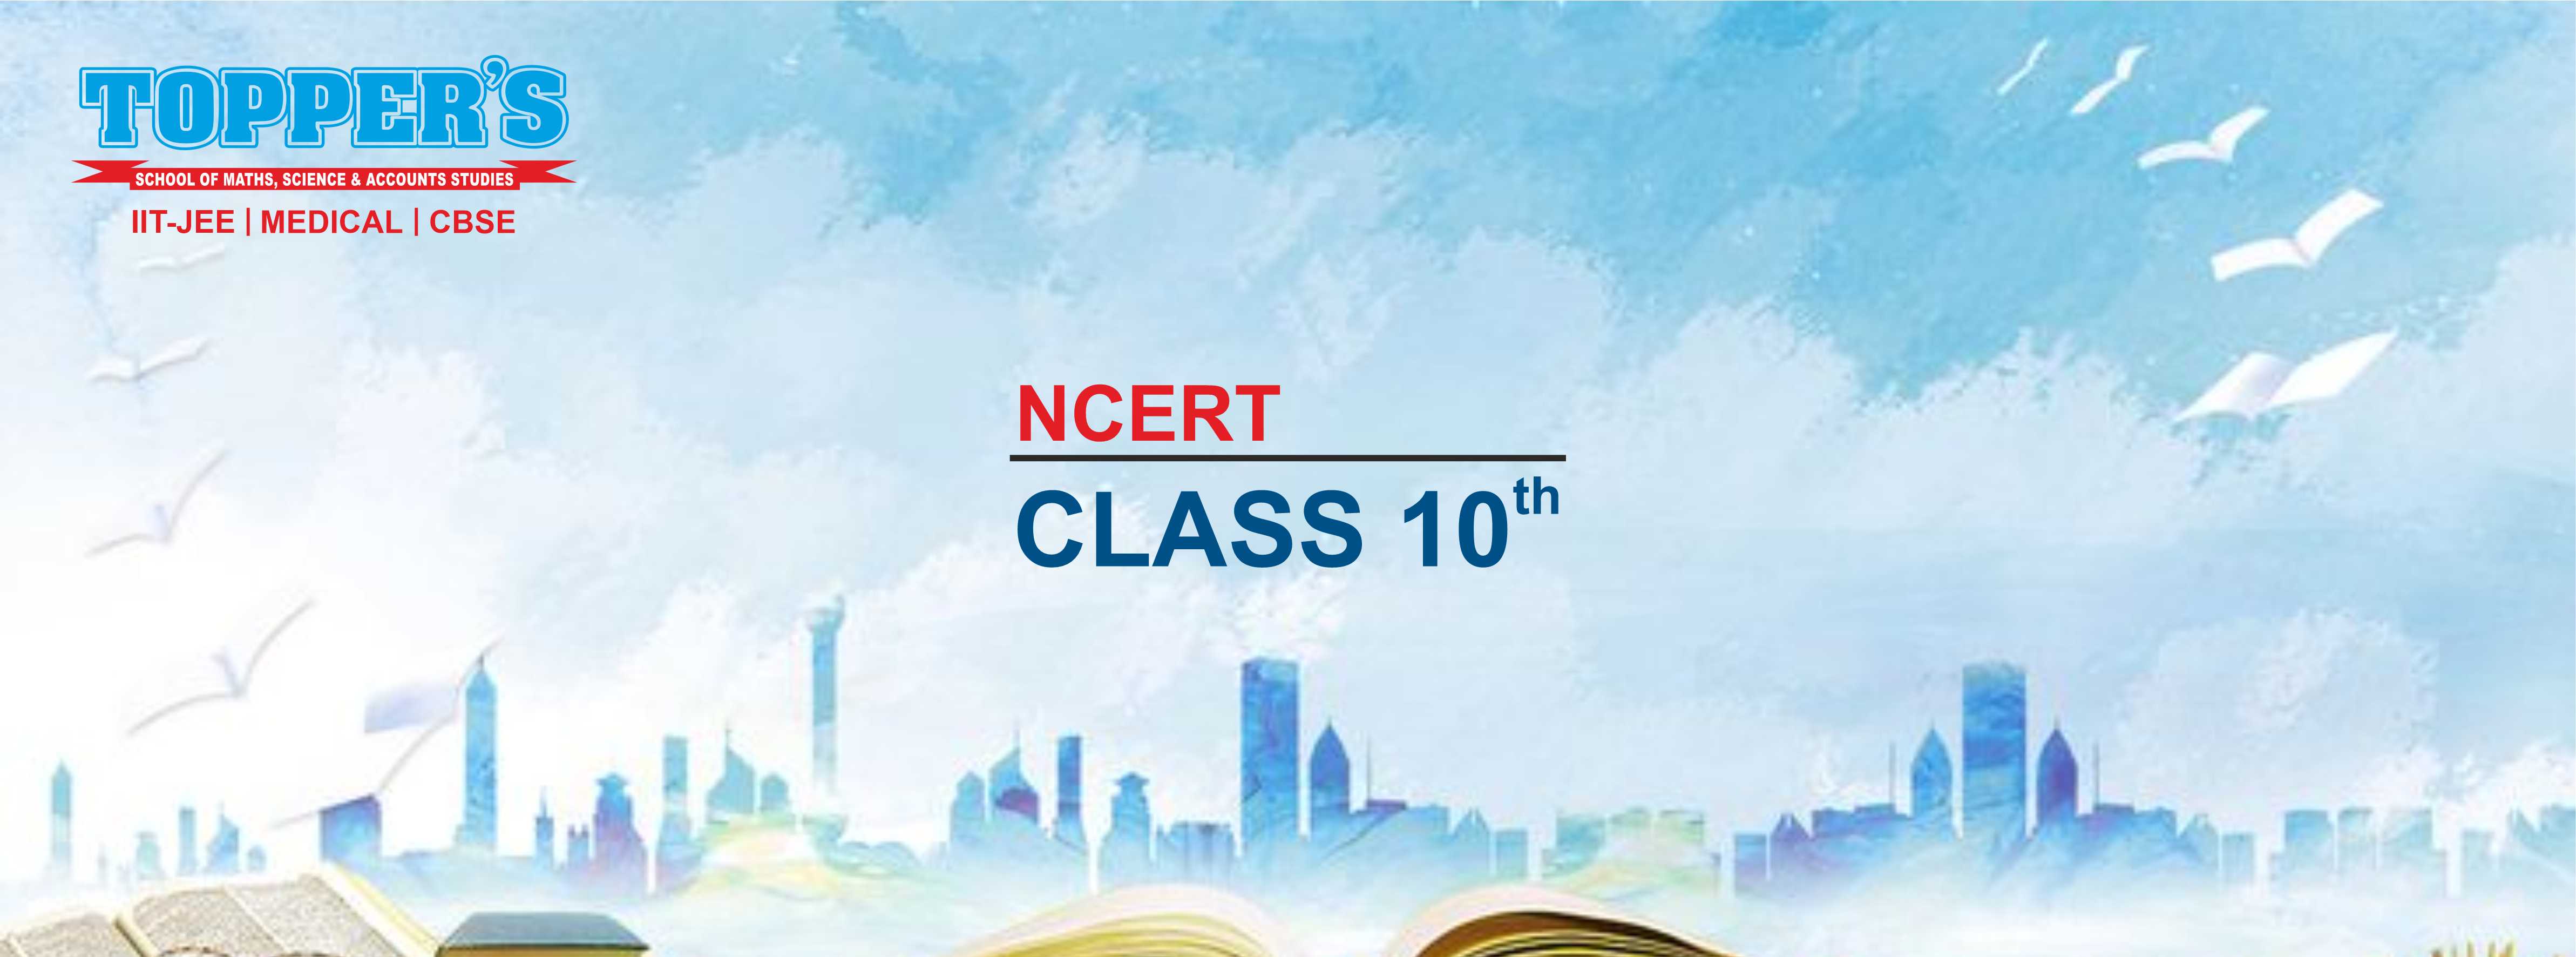 NCERT Solutions for Class 10 English | Download Free NCERT Solutions |  TOPPER'S